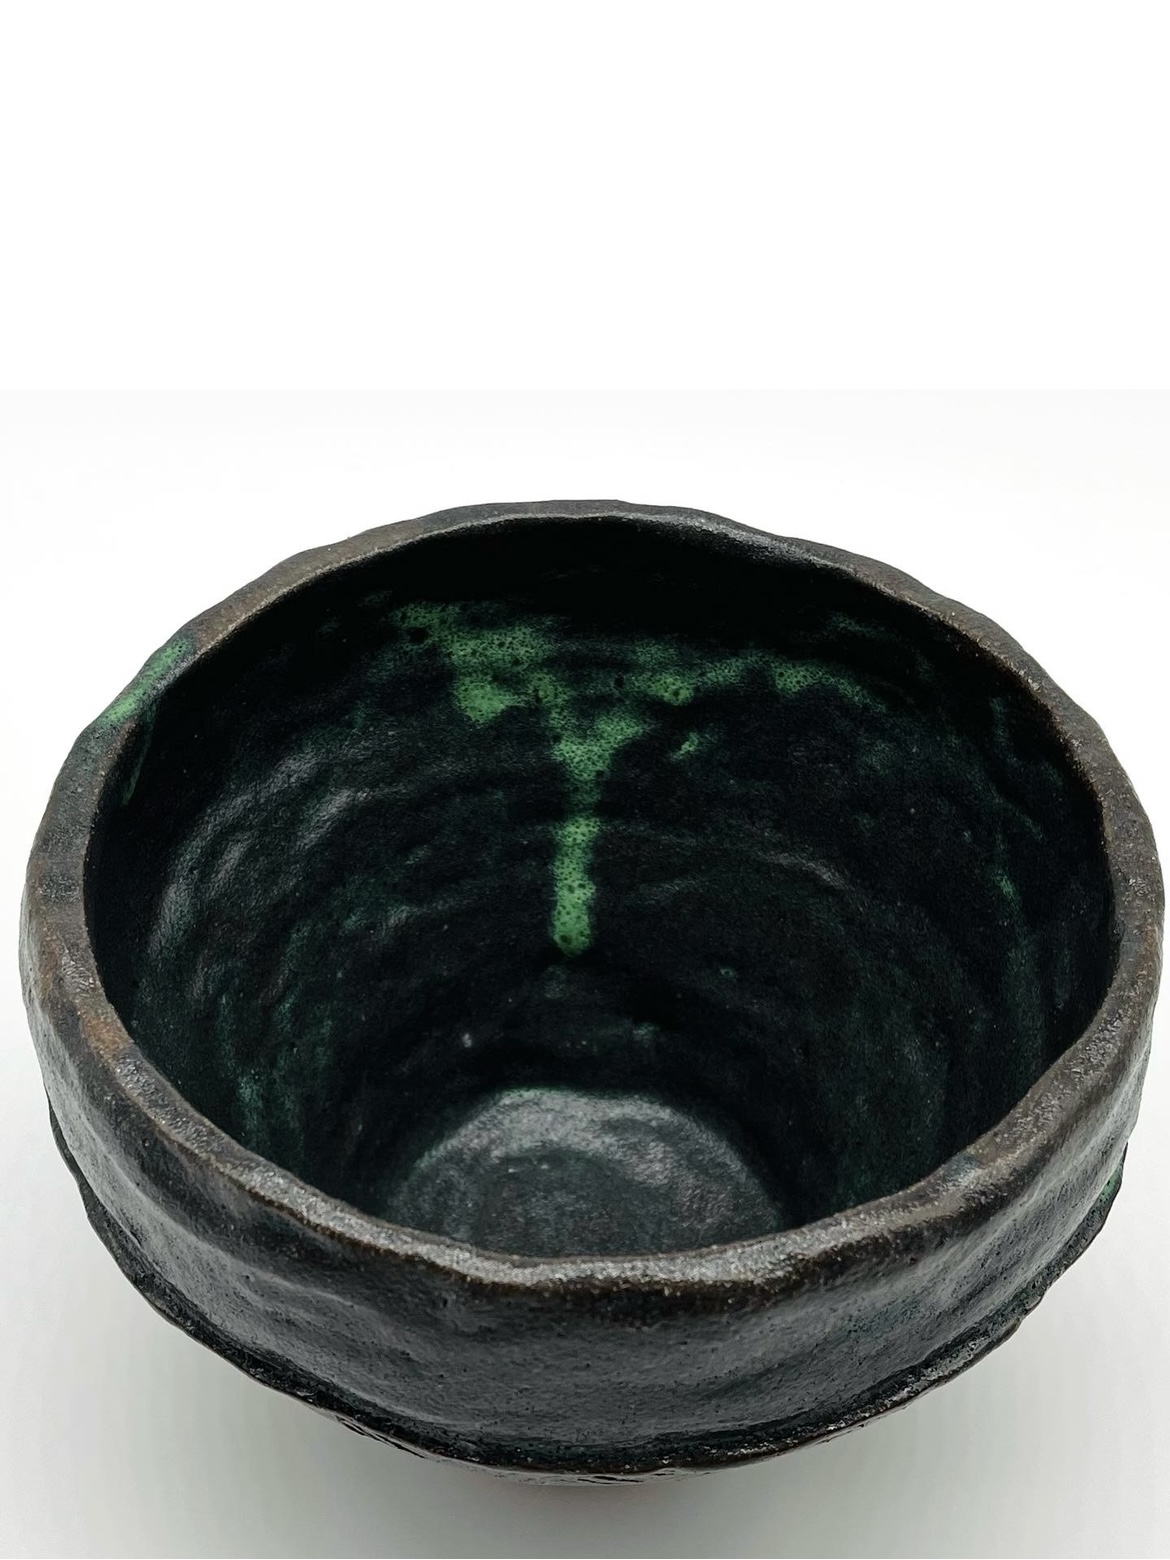 Amador clay with Emerald green glaze 7" x 7" x 5" | $150 Click for full view